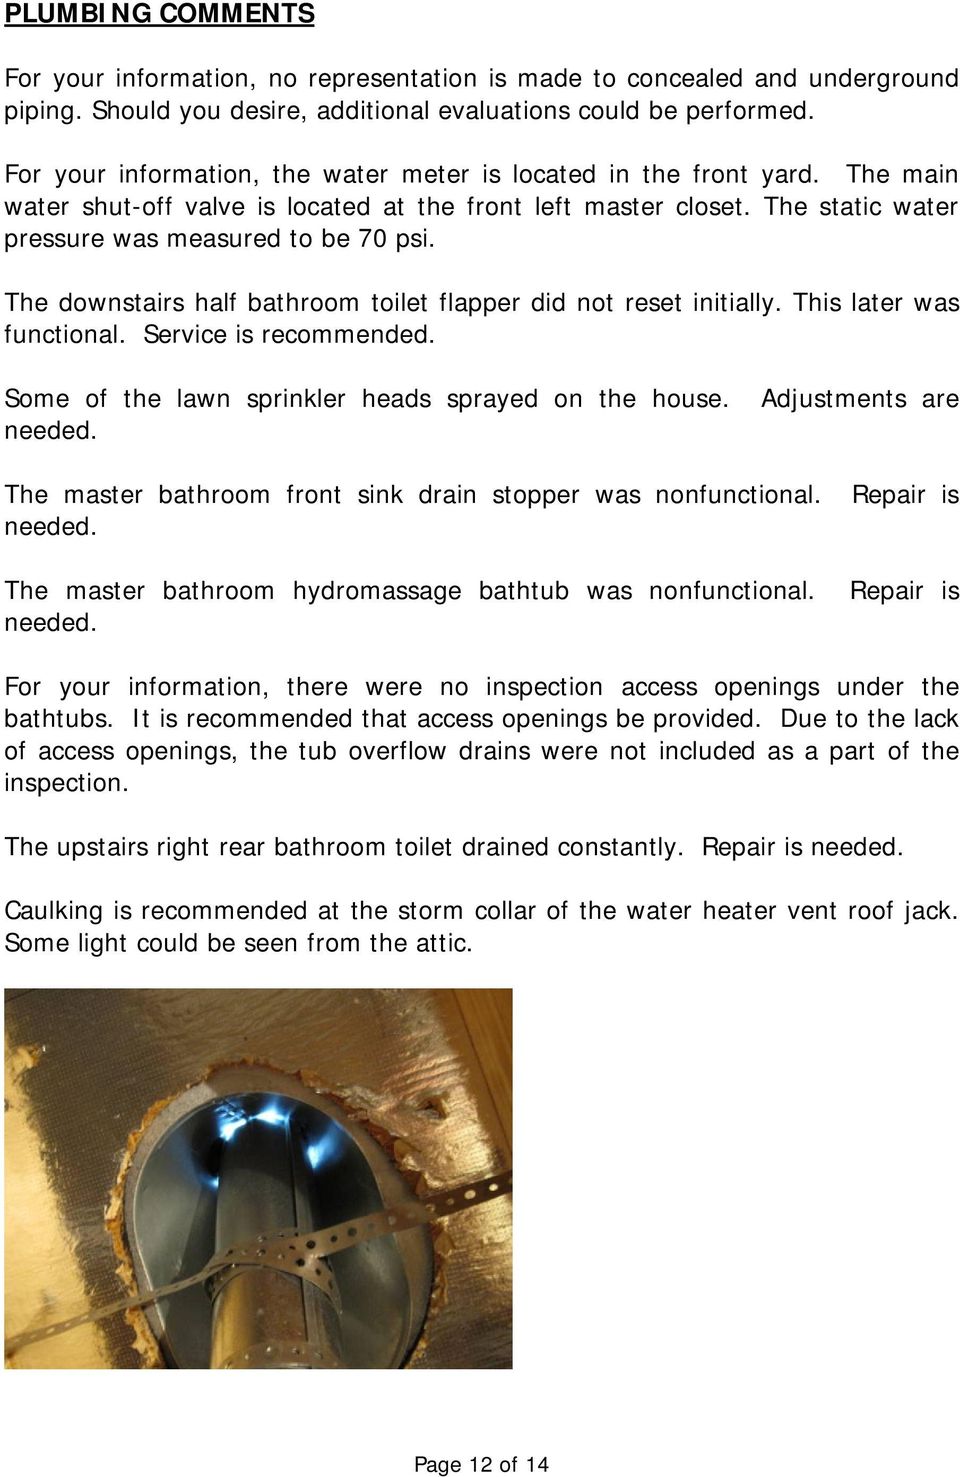 The downstairs half bathroom toilet flapper did not reset initially. This later was functional. Service is recommended. Some of the lawn sprinkler heads sprayed on the house. Adjustments are needed.